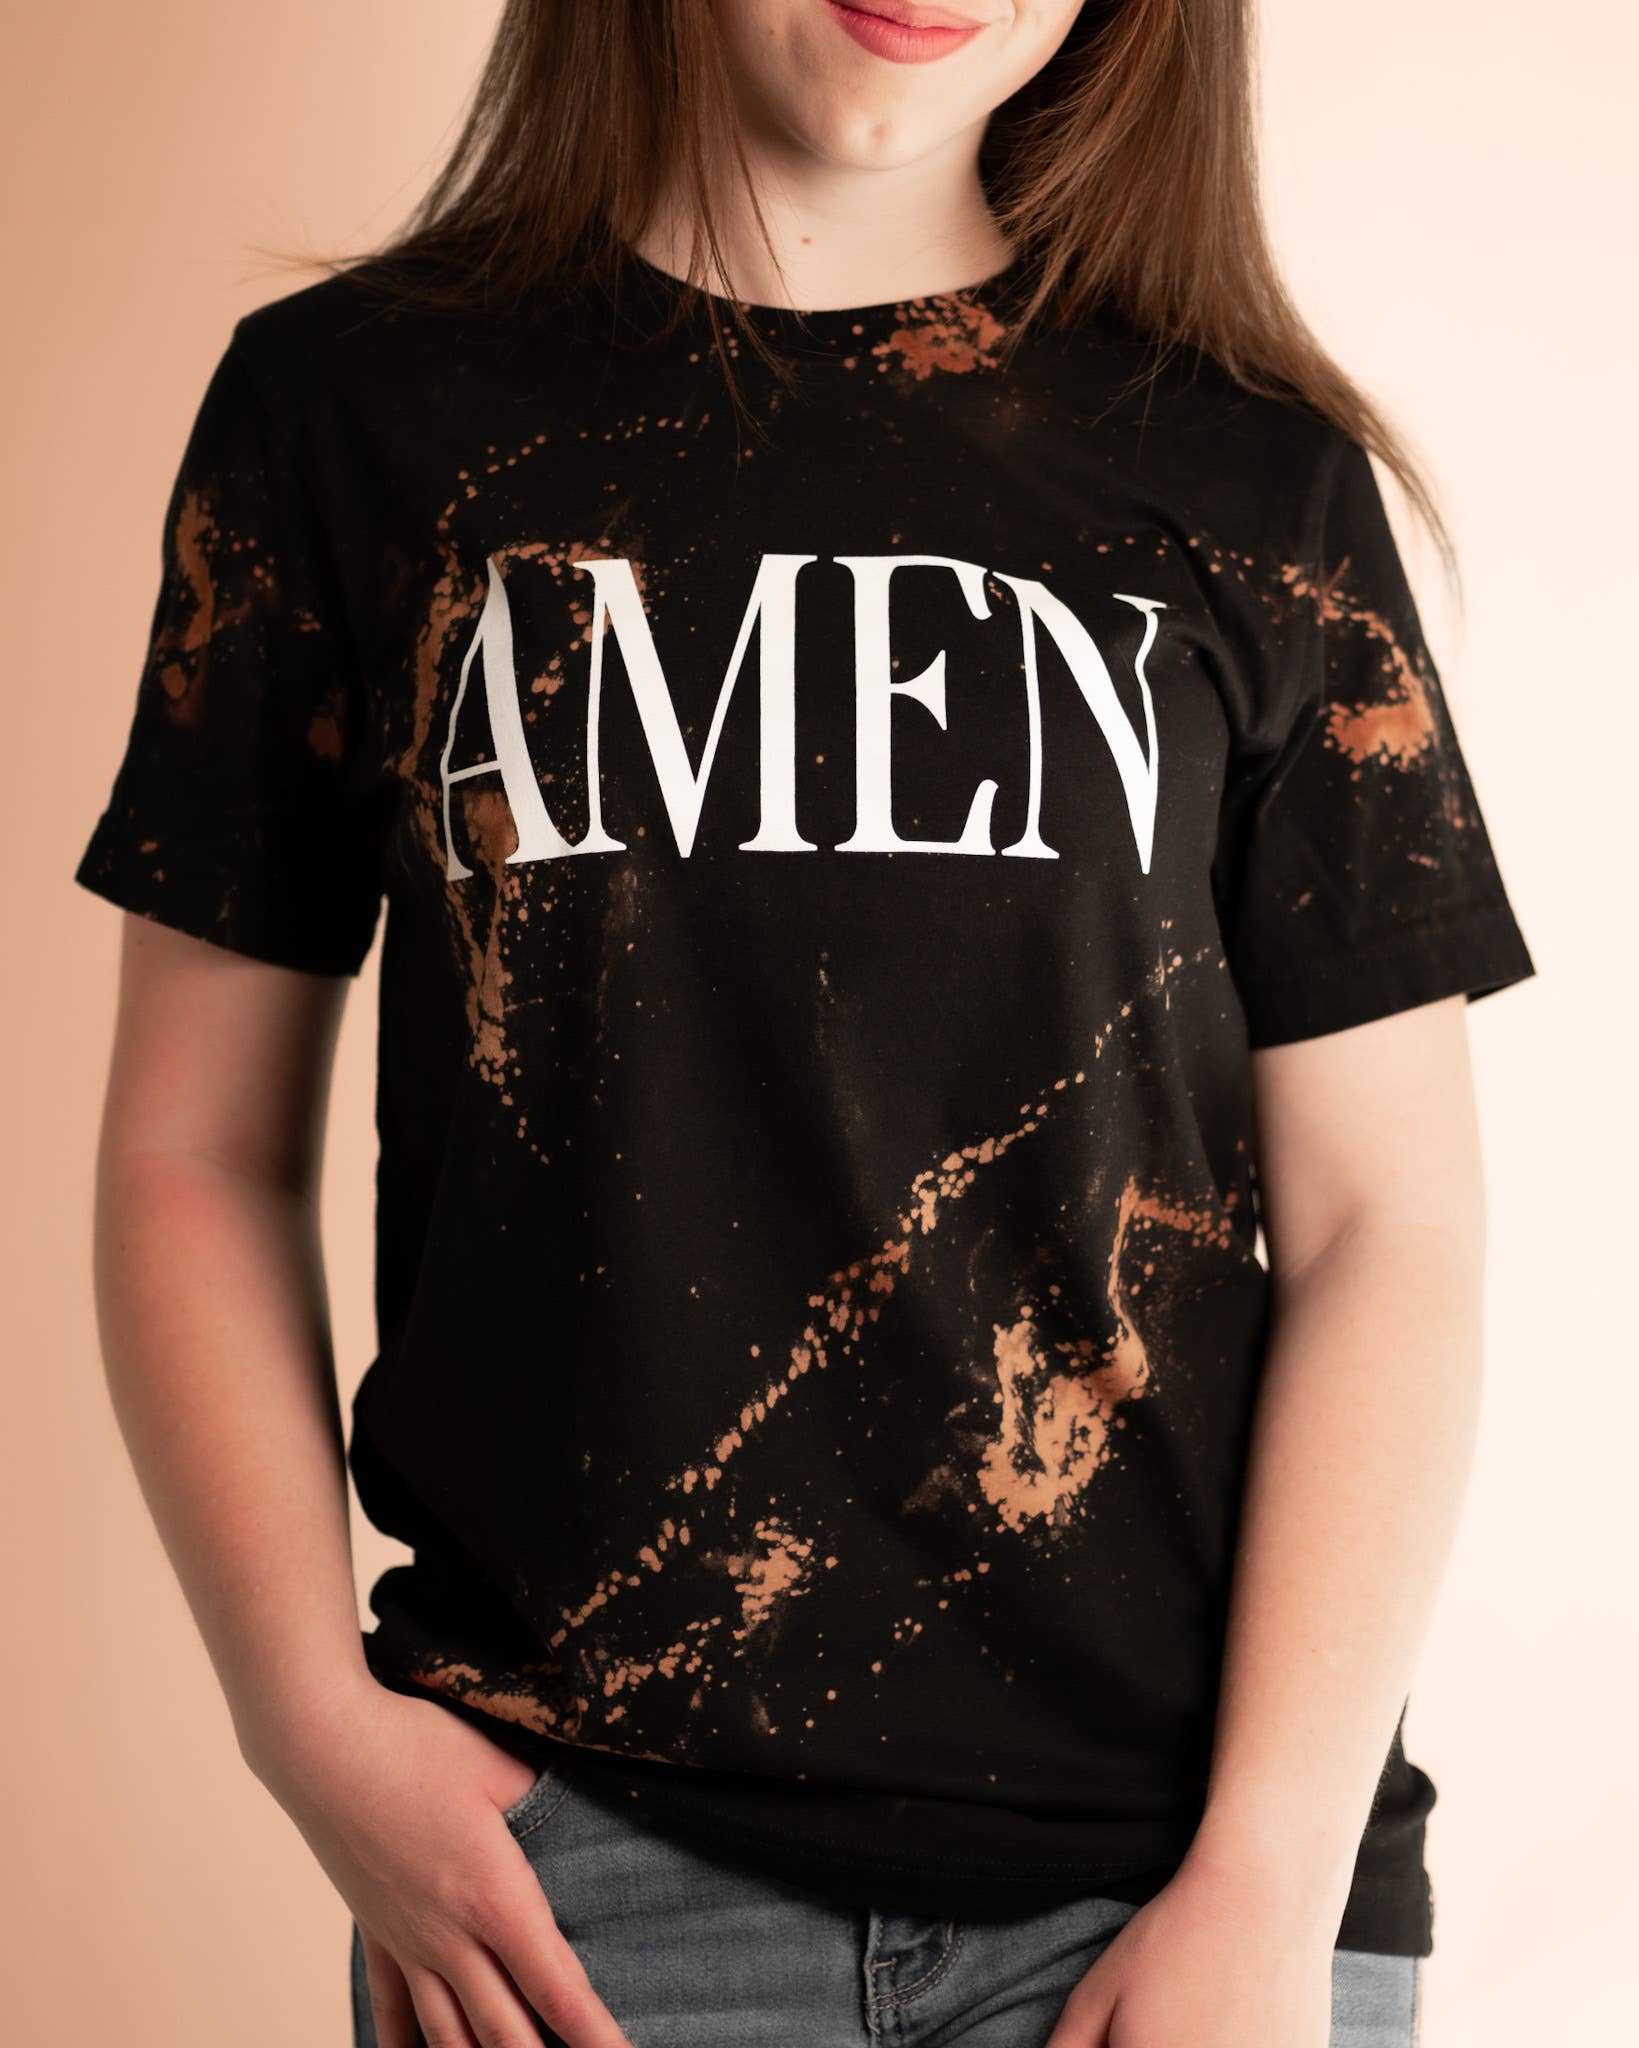 Amen Bleached Graphic Tee – Bohemian Black by Walking Roses